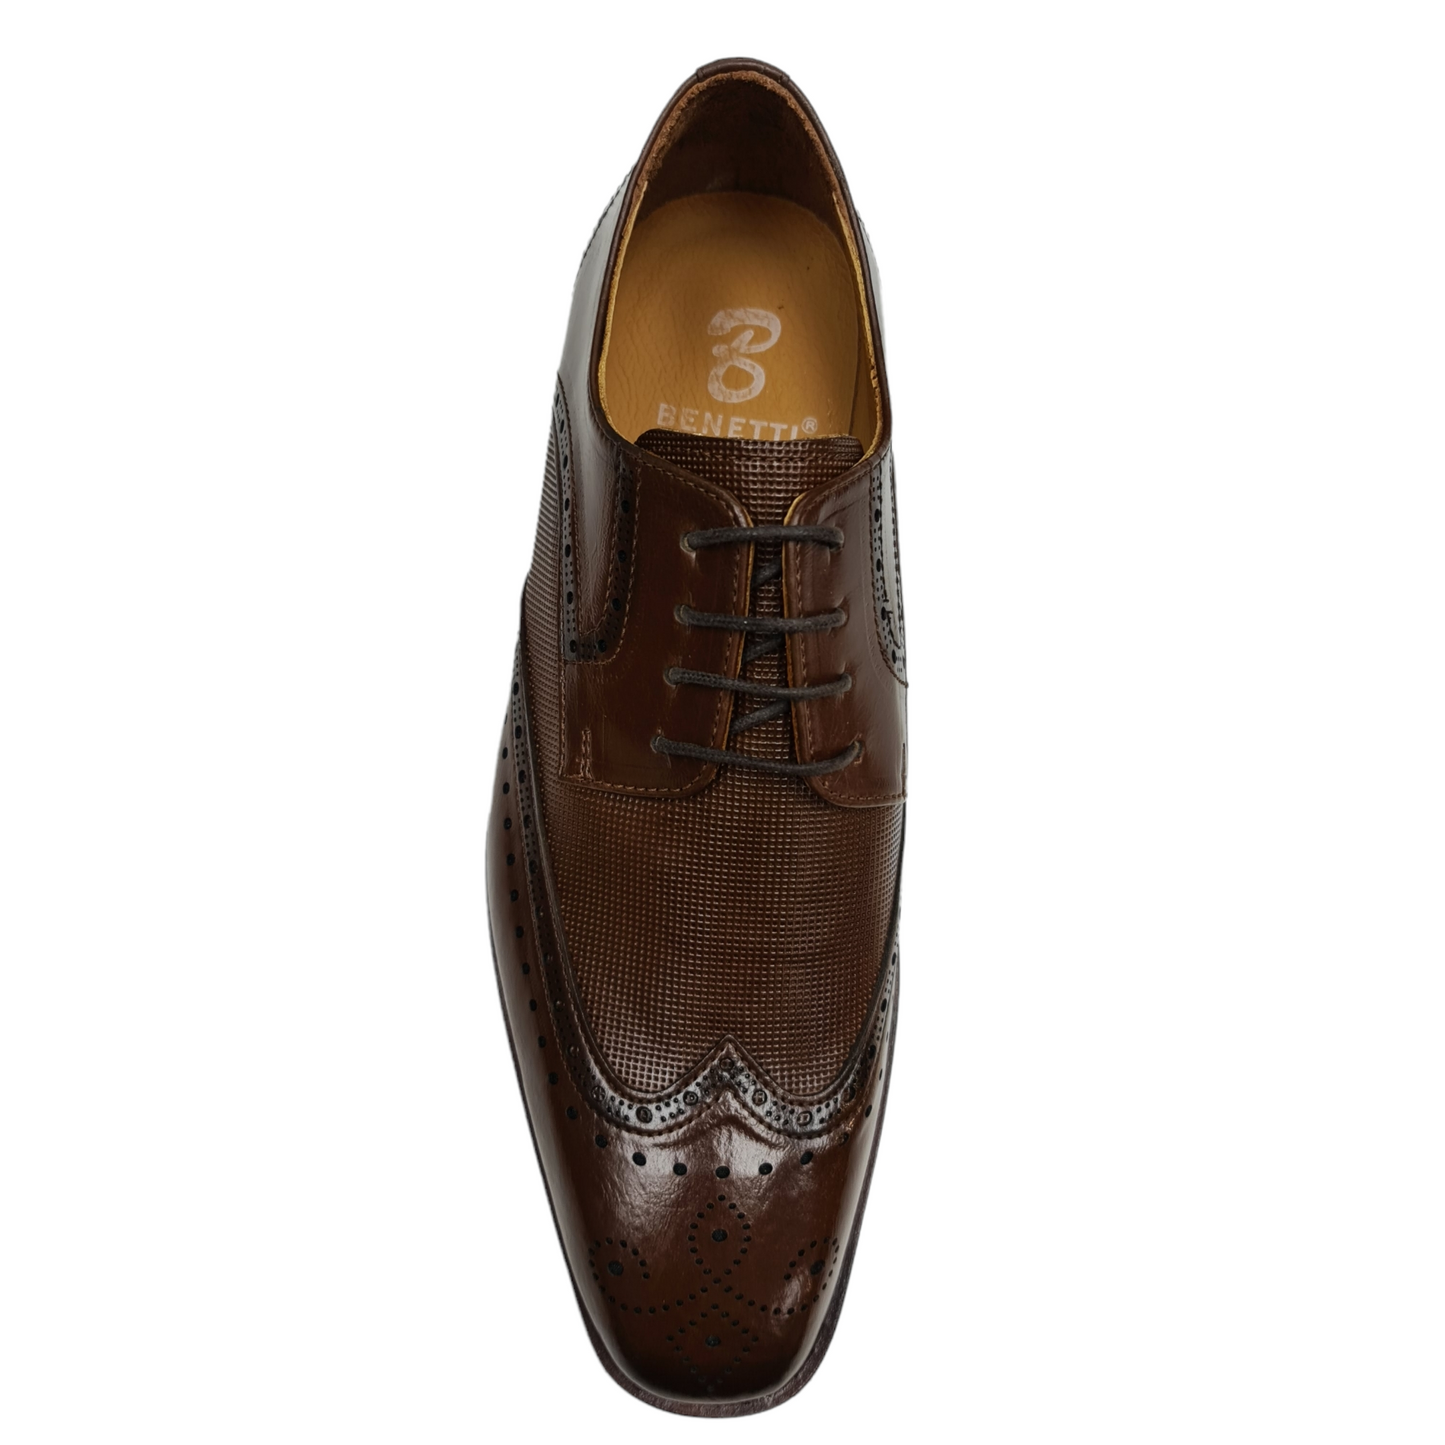 Benetti George Chestnut Shoes